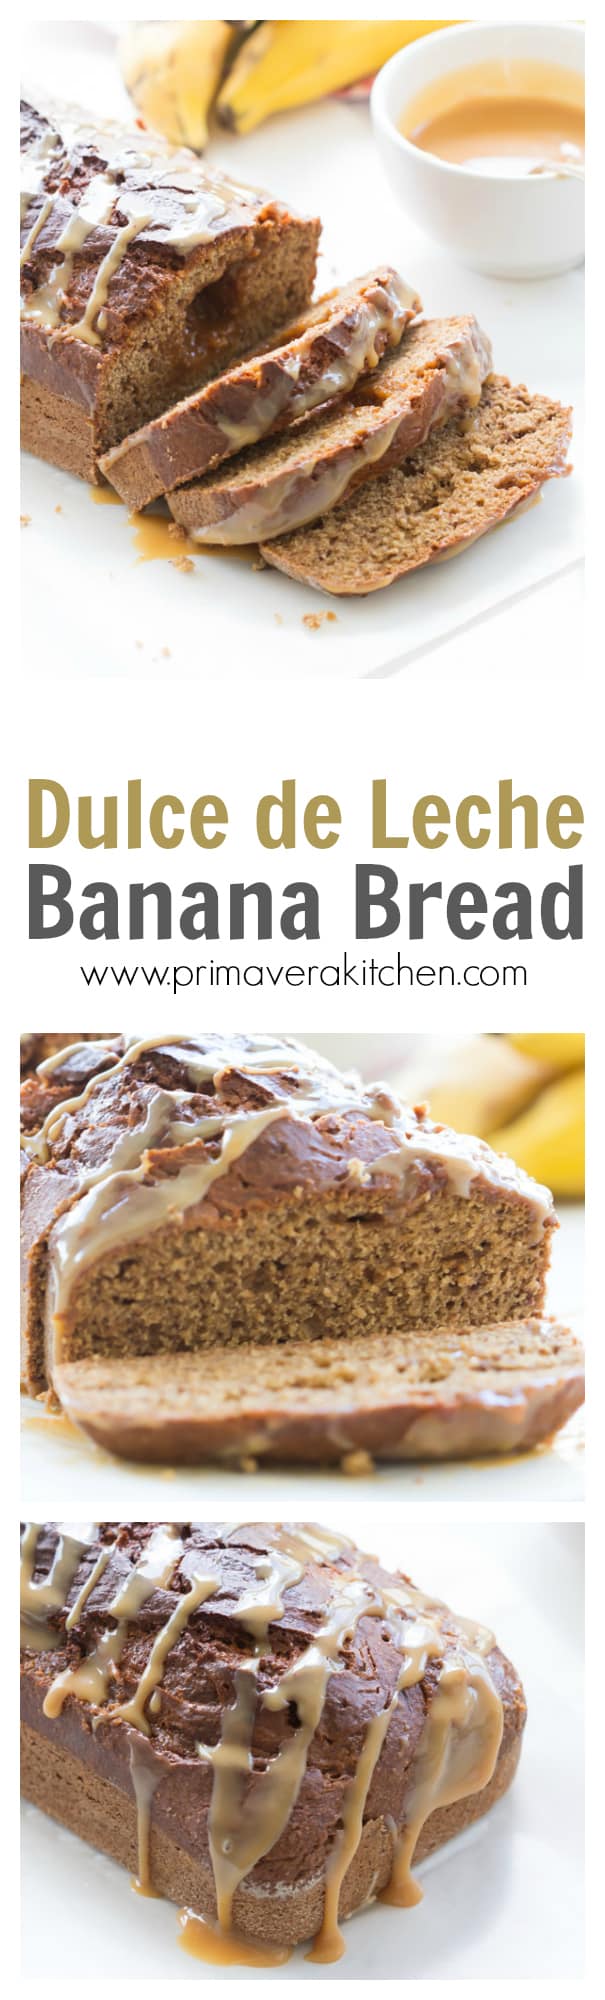 Dulce de Leche - The dulce de leche is swirled in a classic banana bread recipe, making it even more flavourful and irresistible. This is an amazing recipe with only few ingredients! 